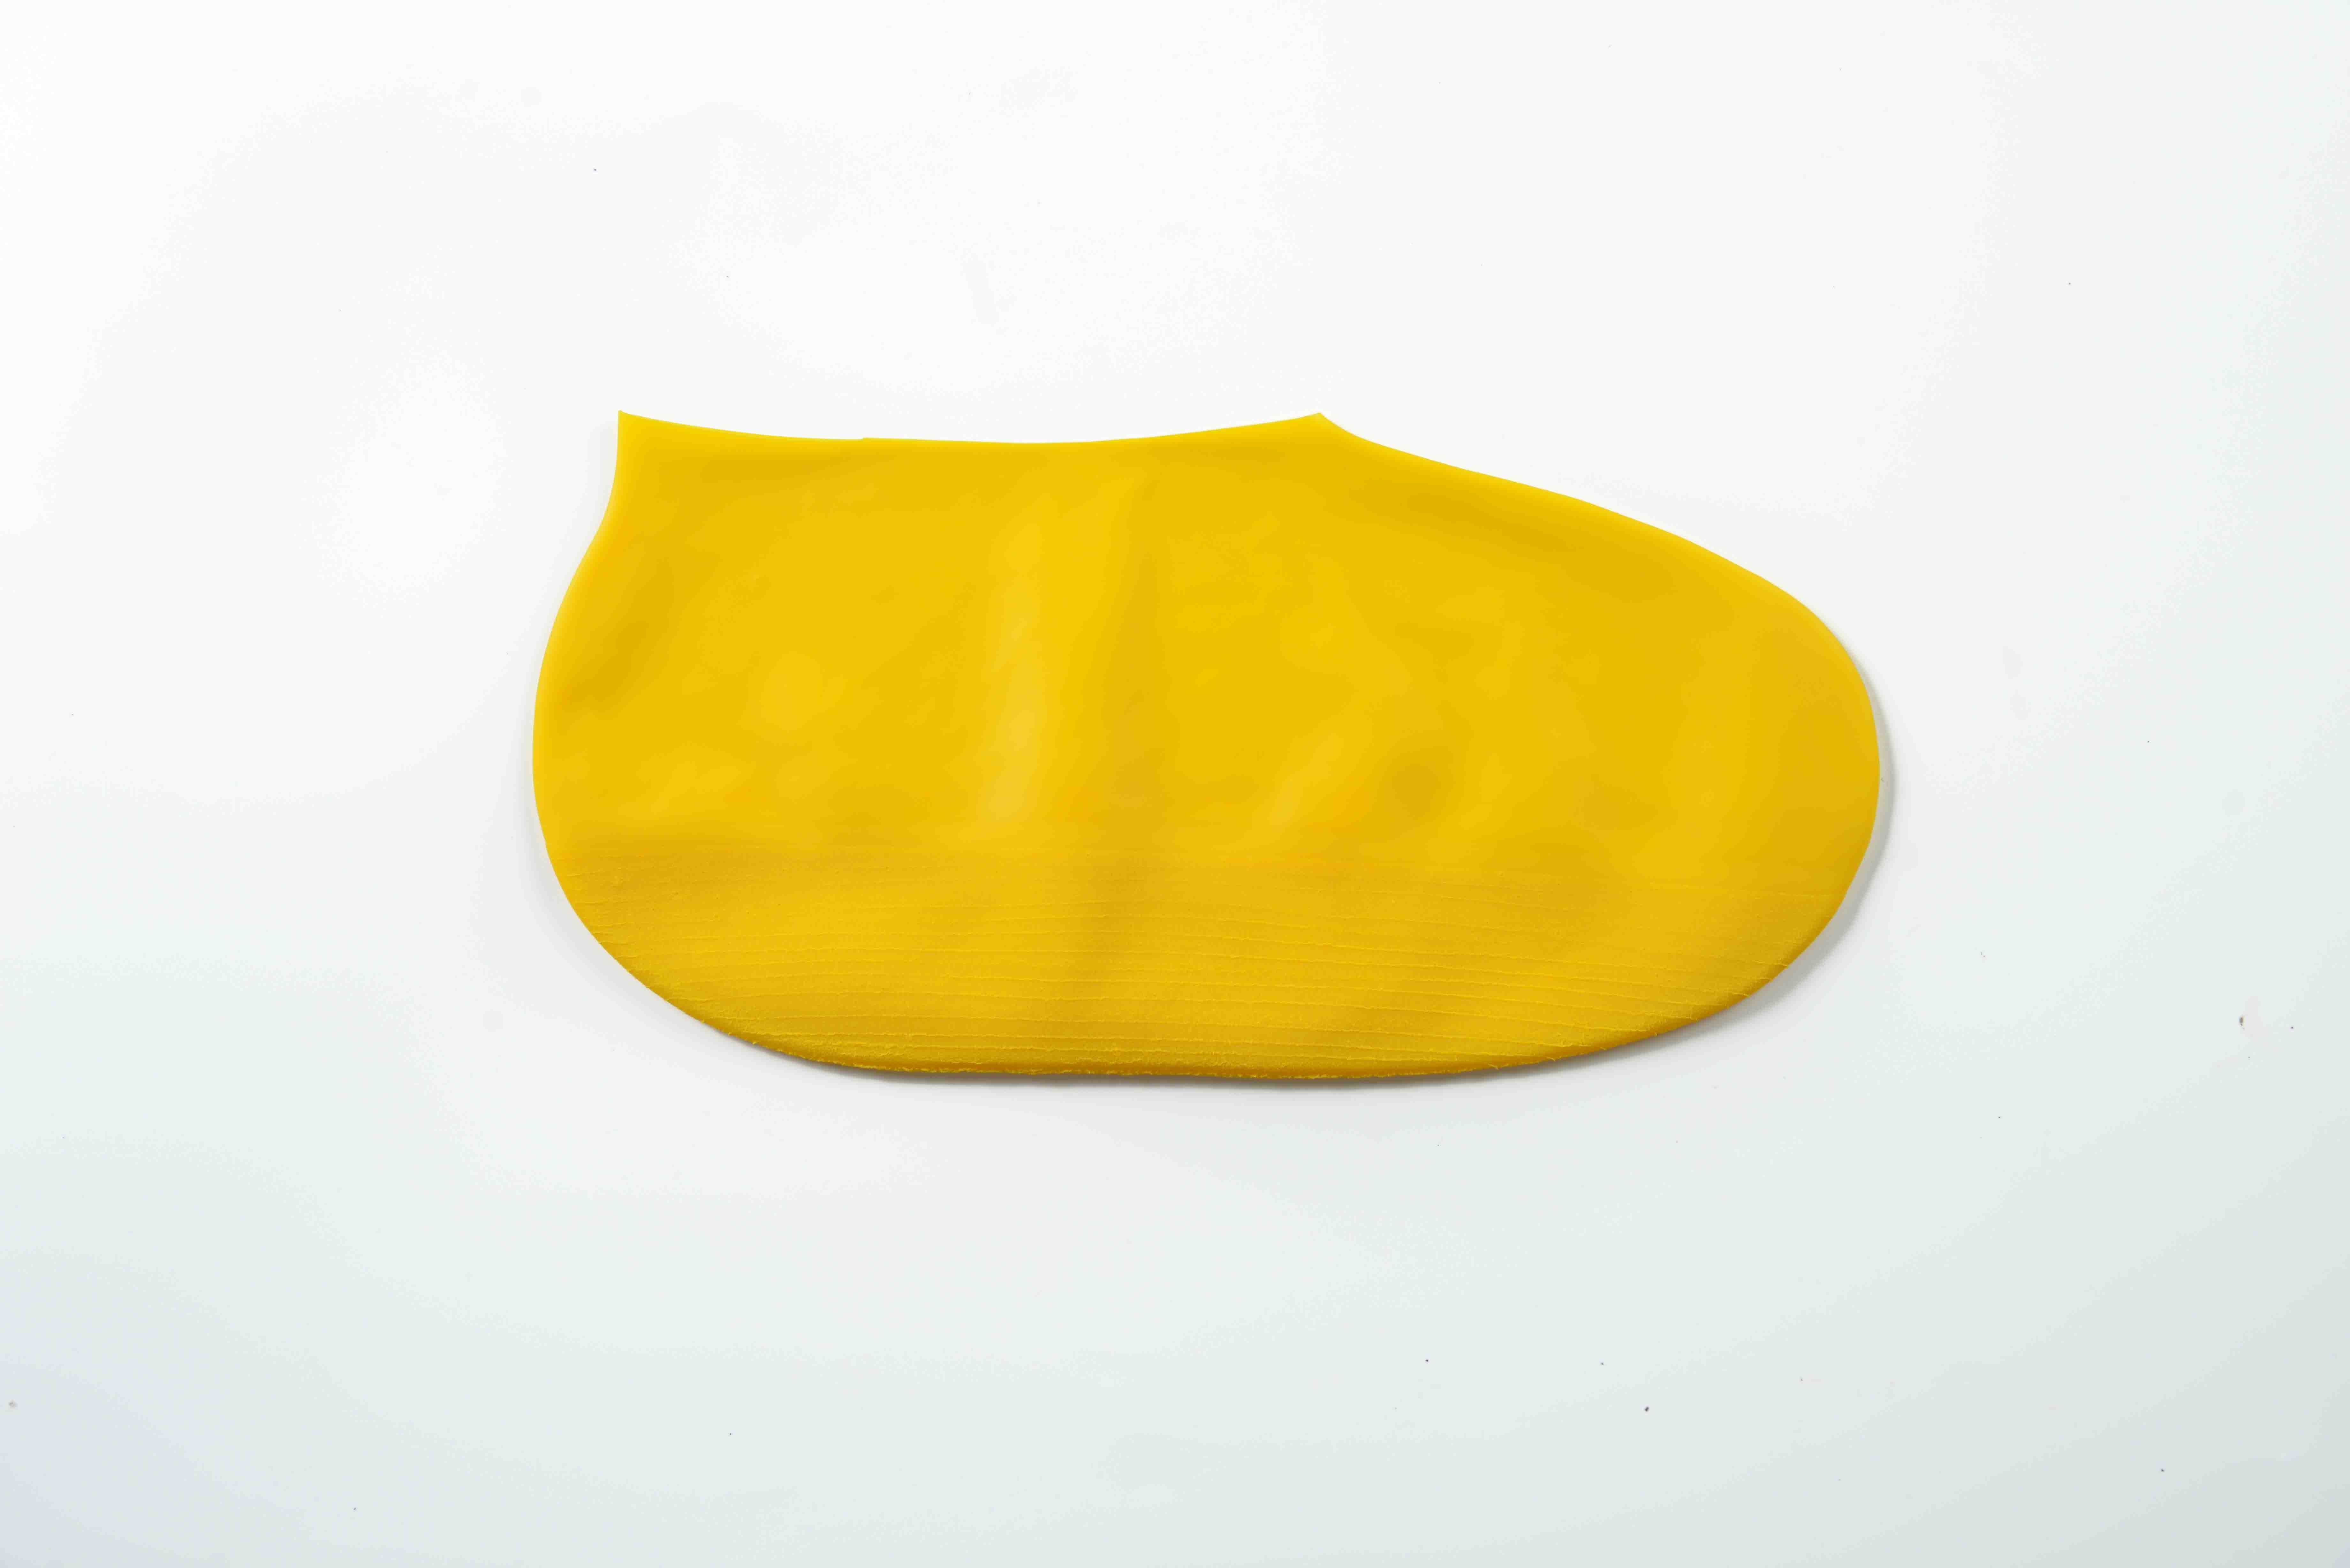 Wholesale price for Rubber shoe cover-M sale to Tursale to